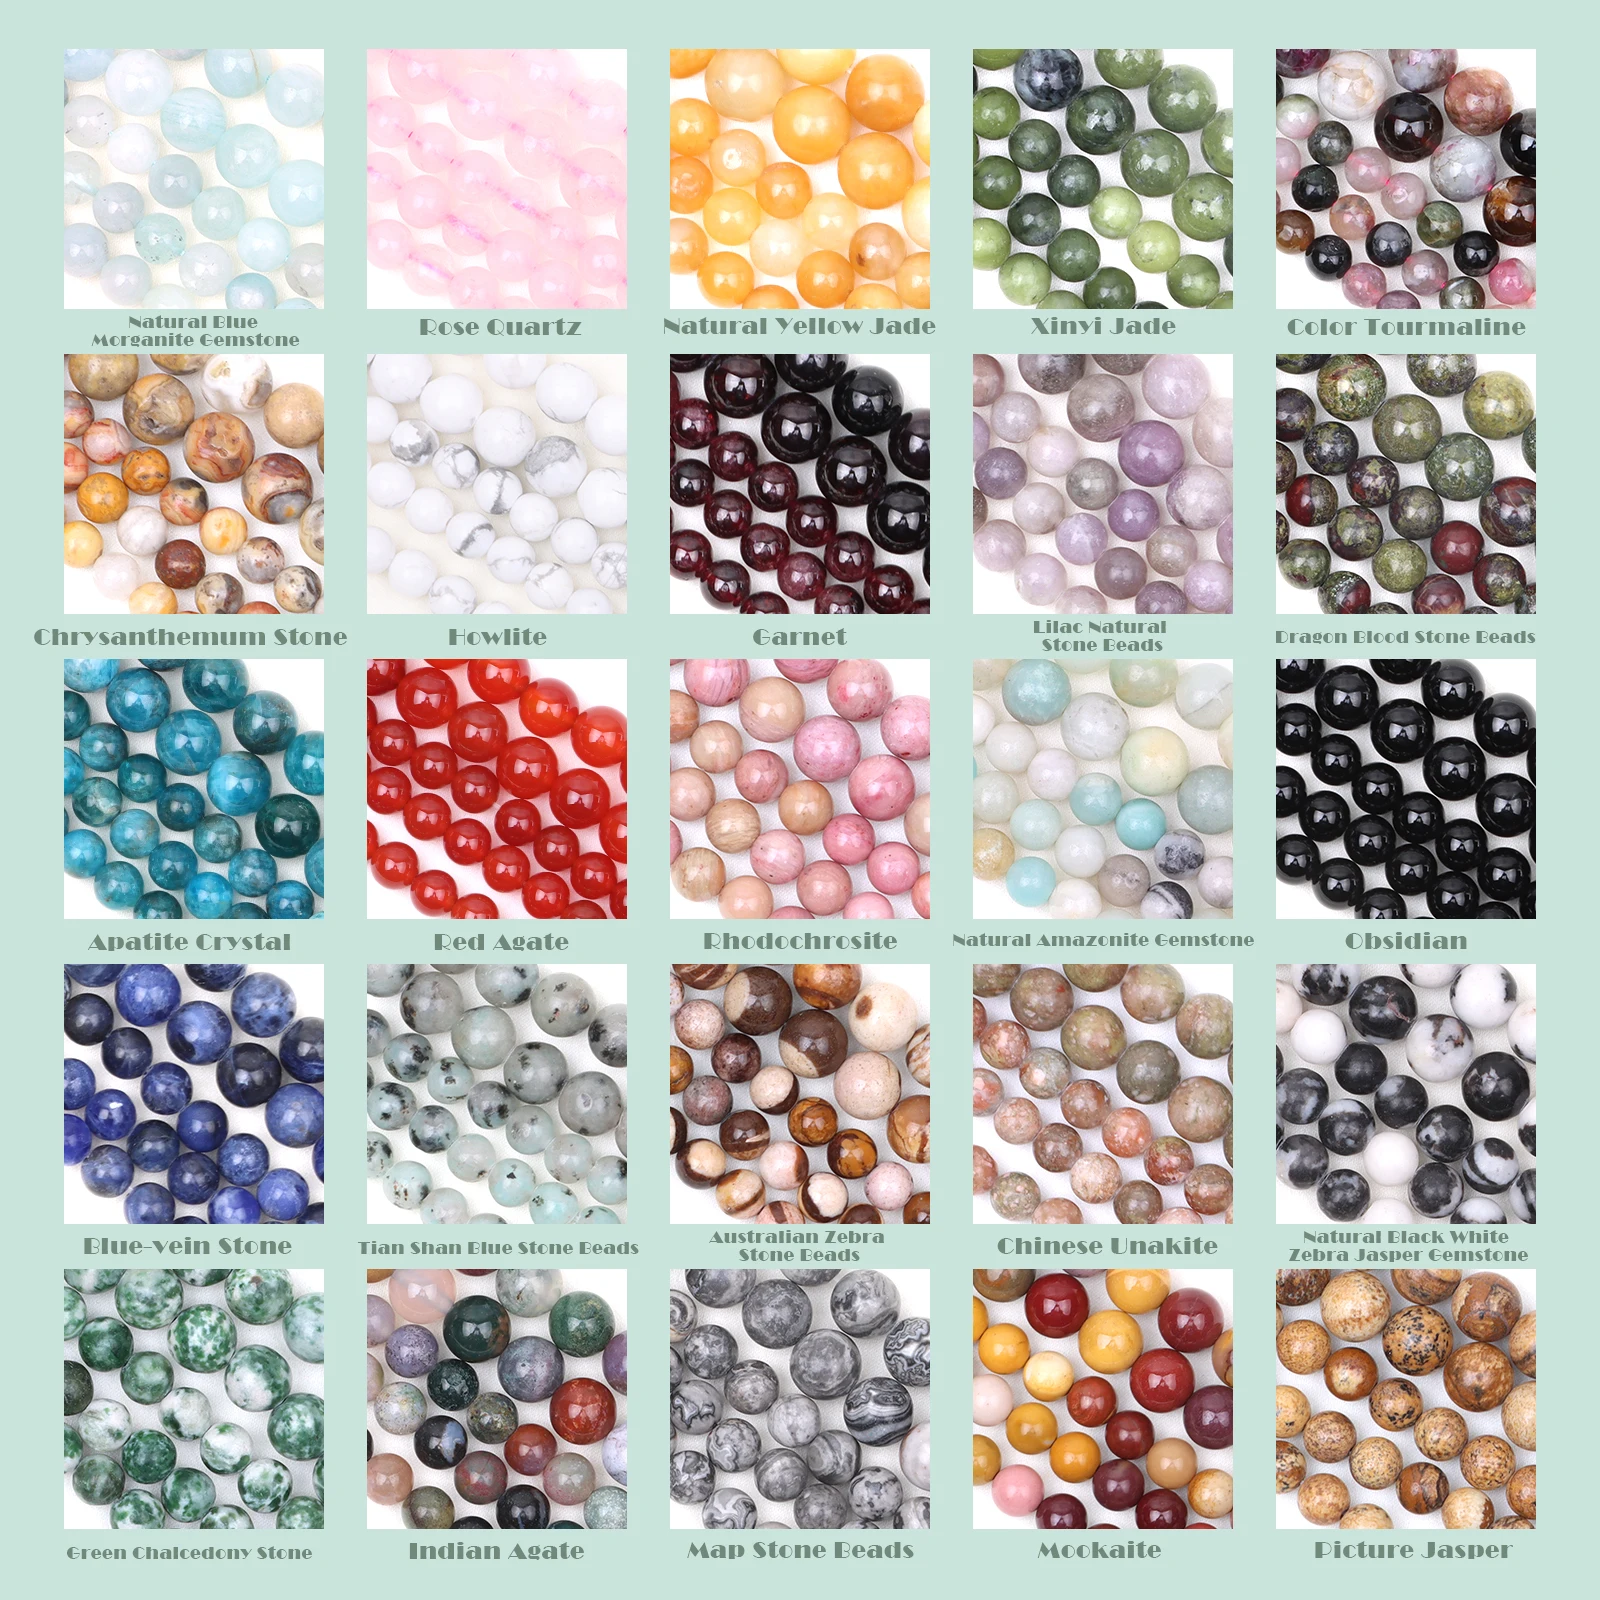 

Natural Round Stone Beads, Natural Gemstone Hole Size 1mm Crystal Energy Stone Healing Power Smooth Loose Beads for Bracelet Jew